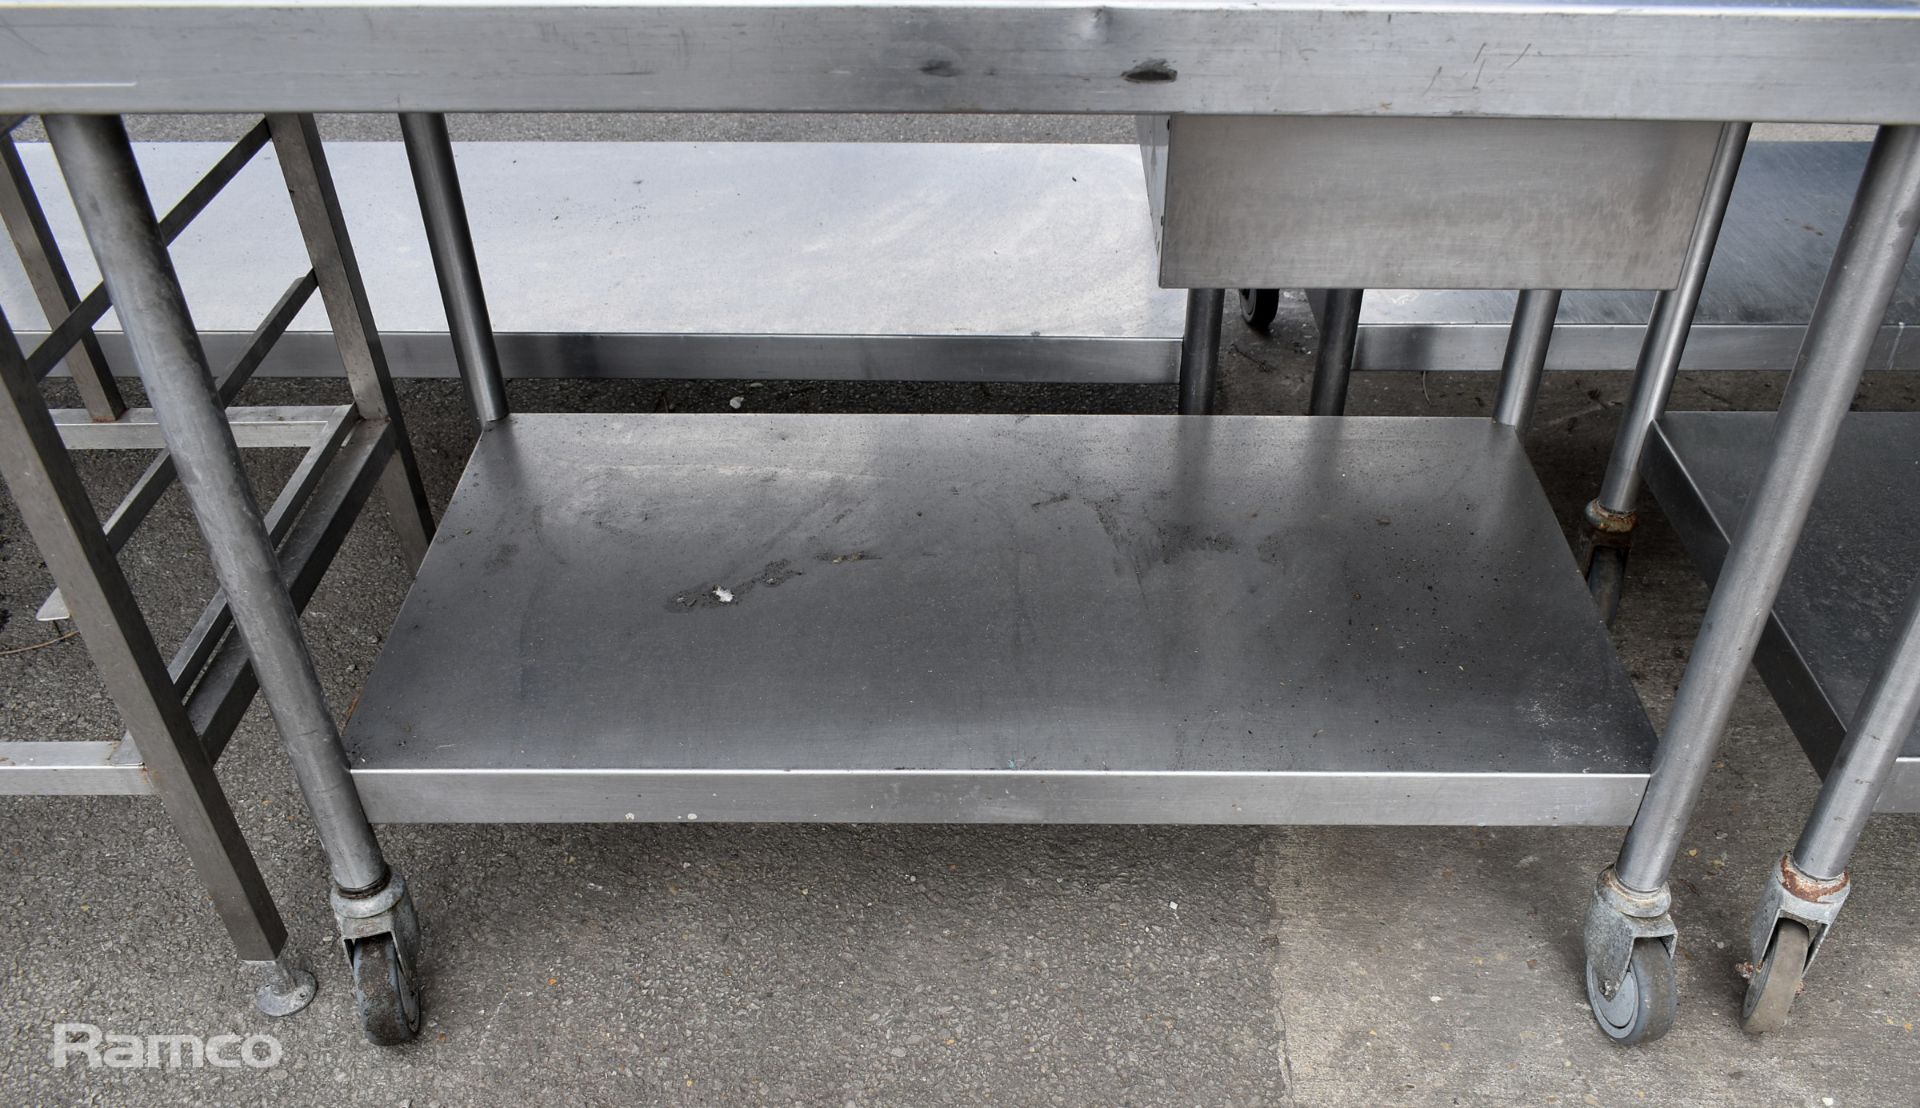 Stainless steel table on castors - W 1400 x D 700 x H 880mm - Image 3 of 4